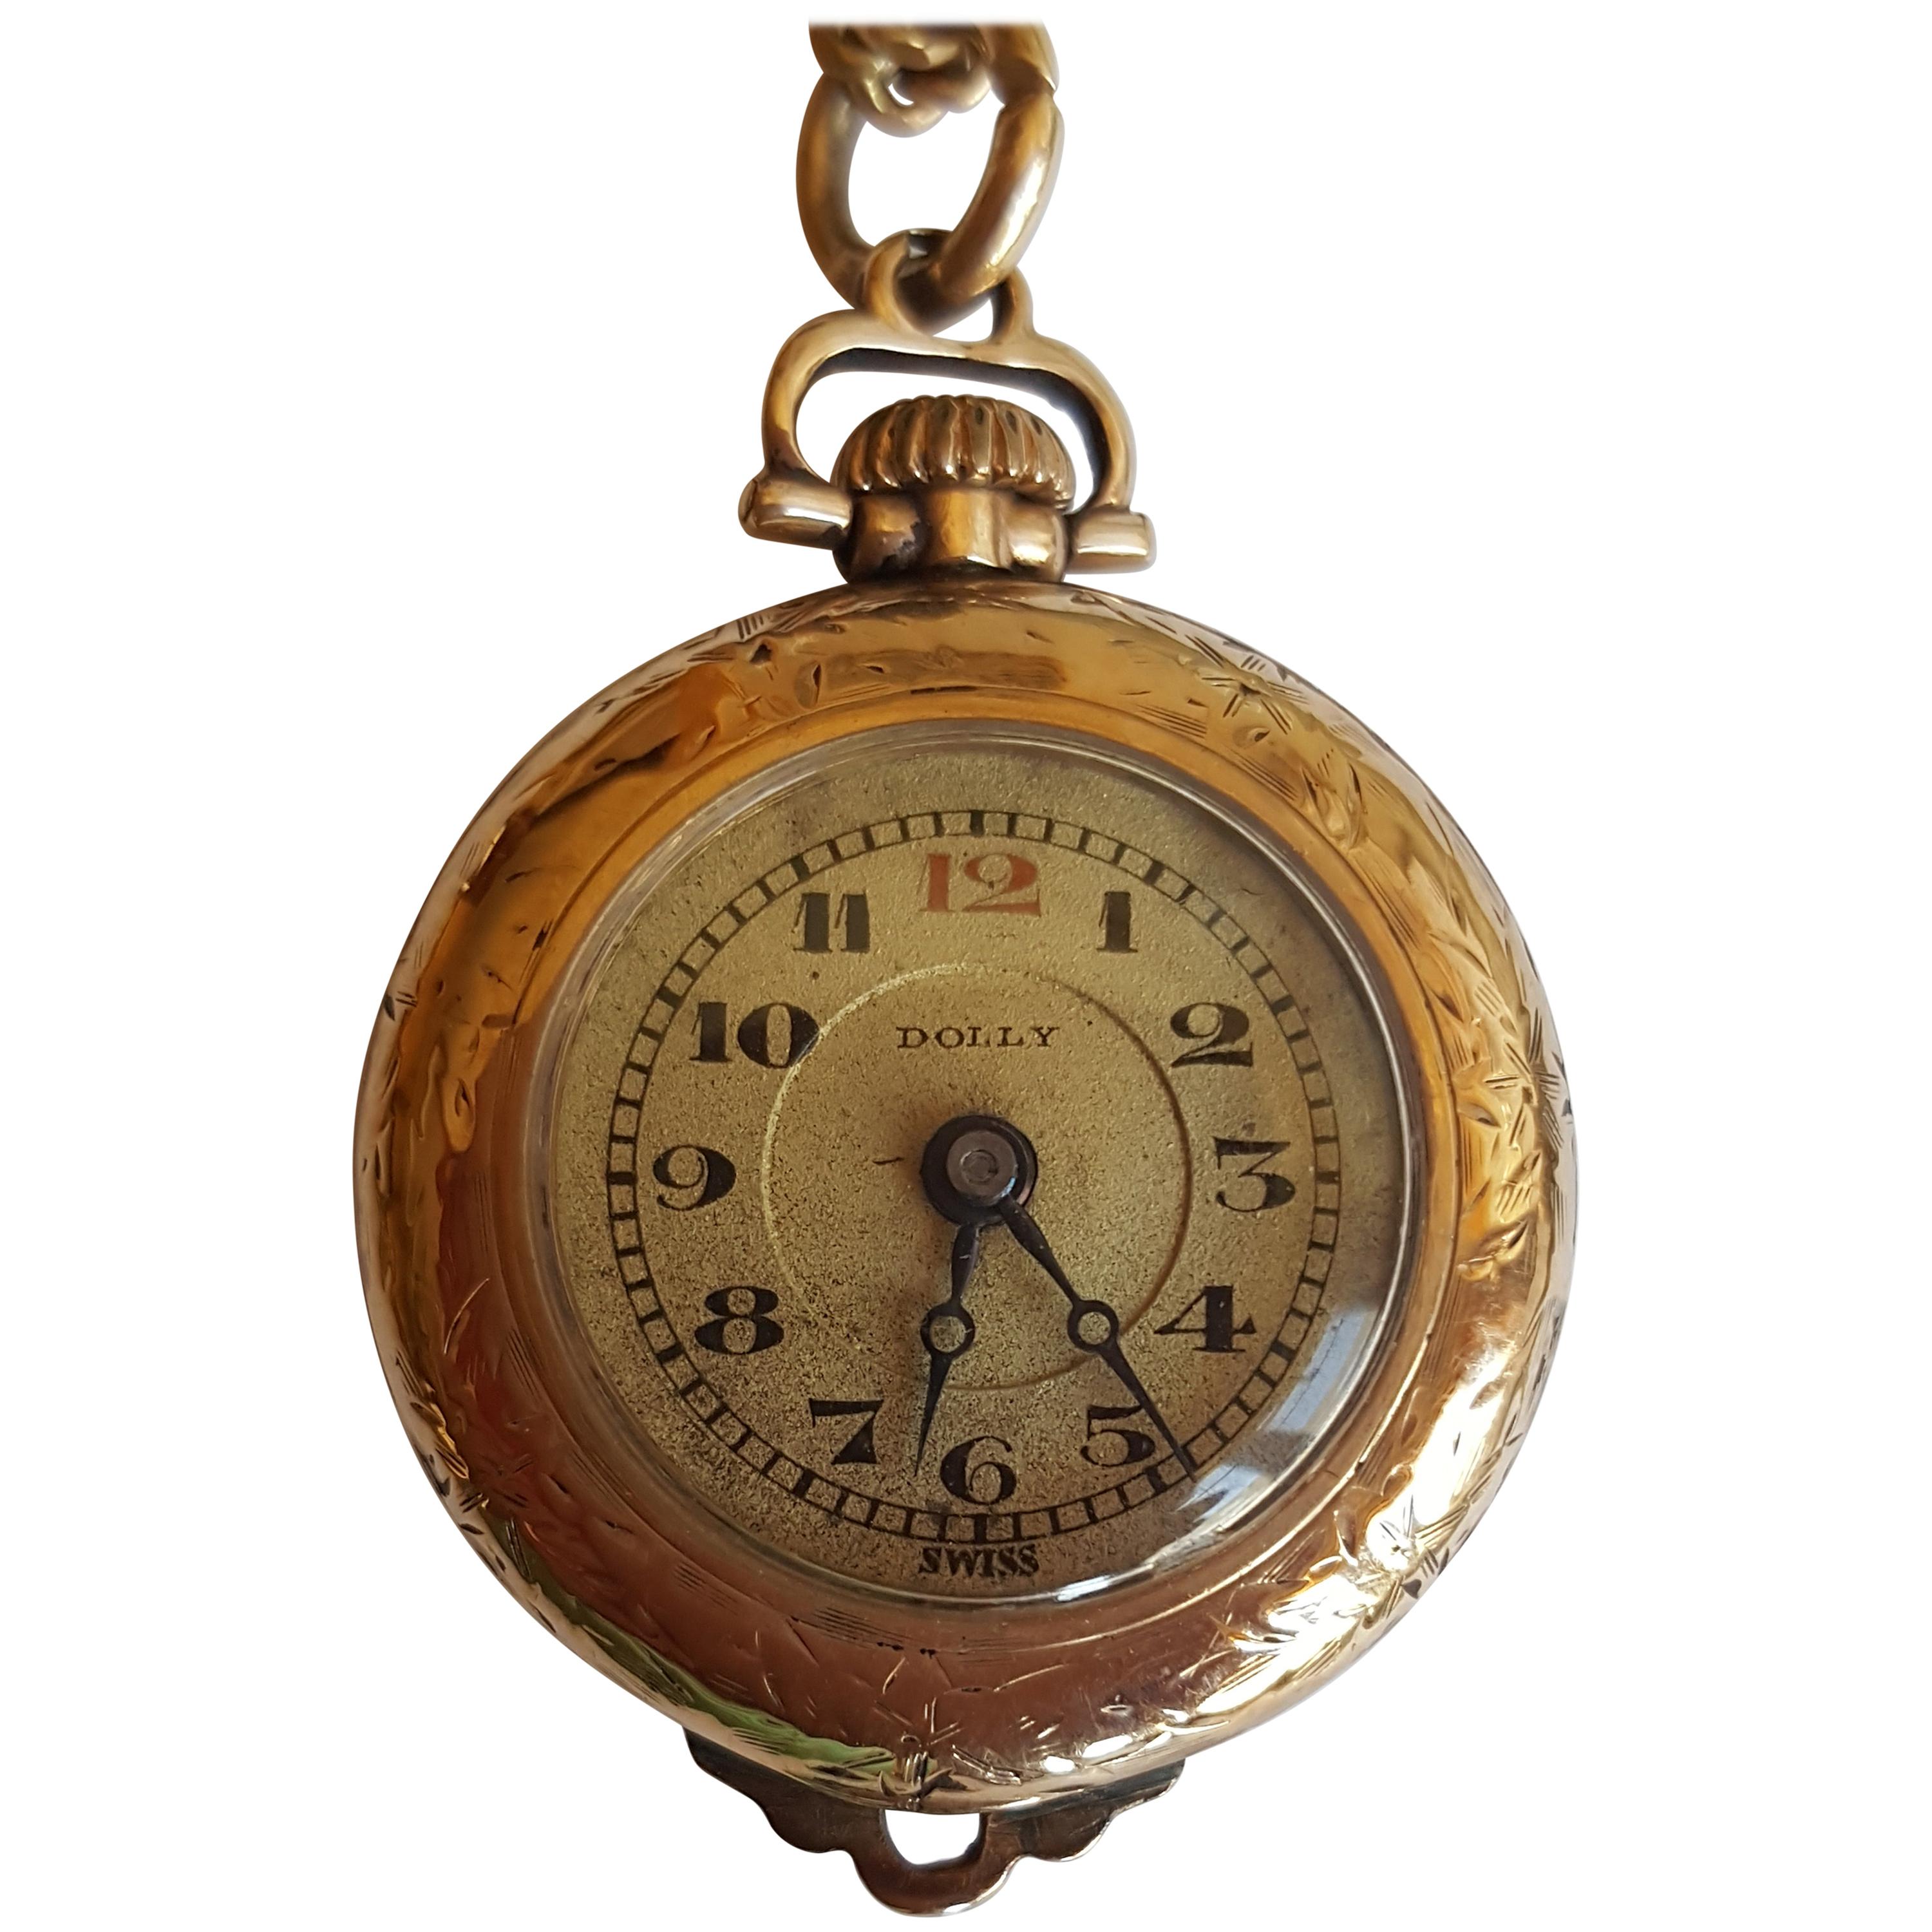 Vintage Gold-Plated Pendant Watch, Dolly Brand, Working, 15 Jewel